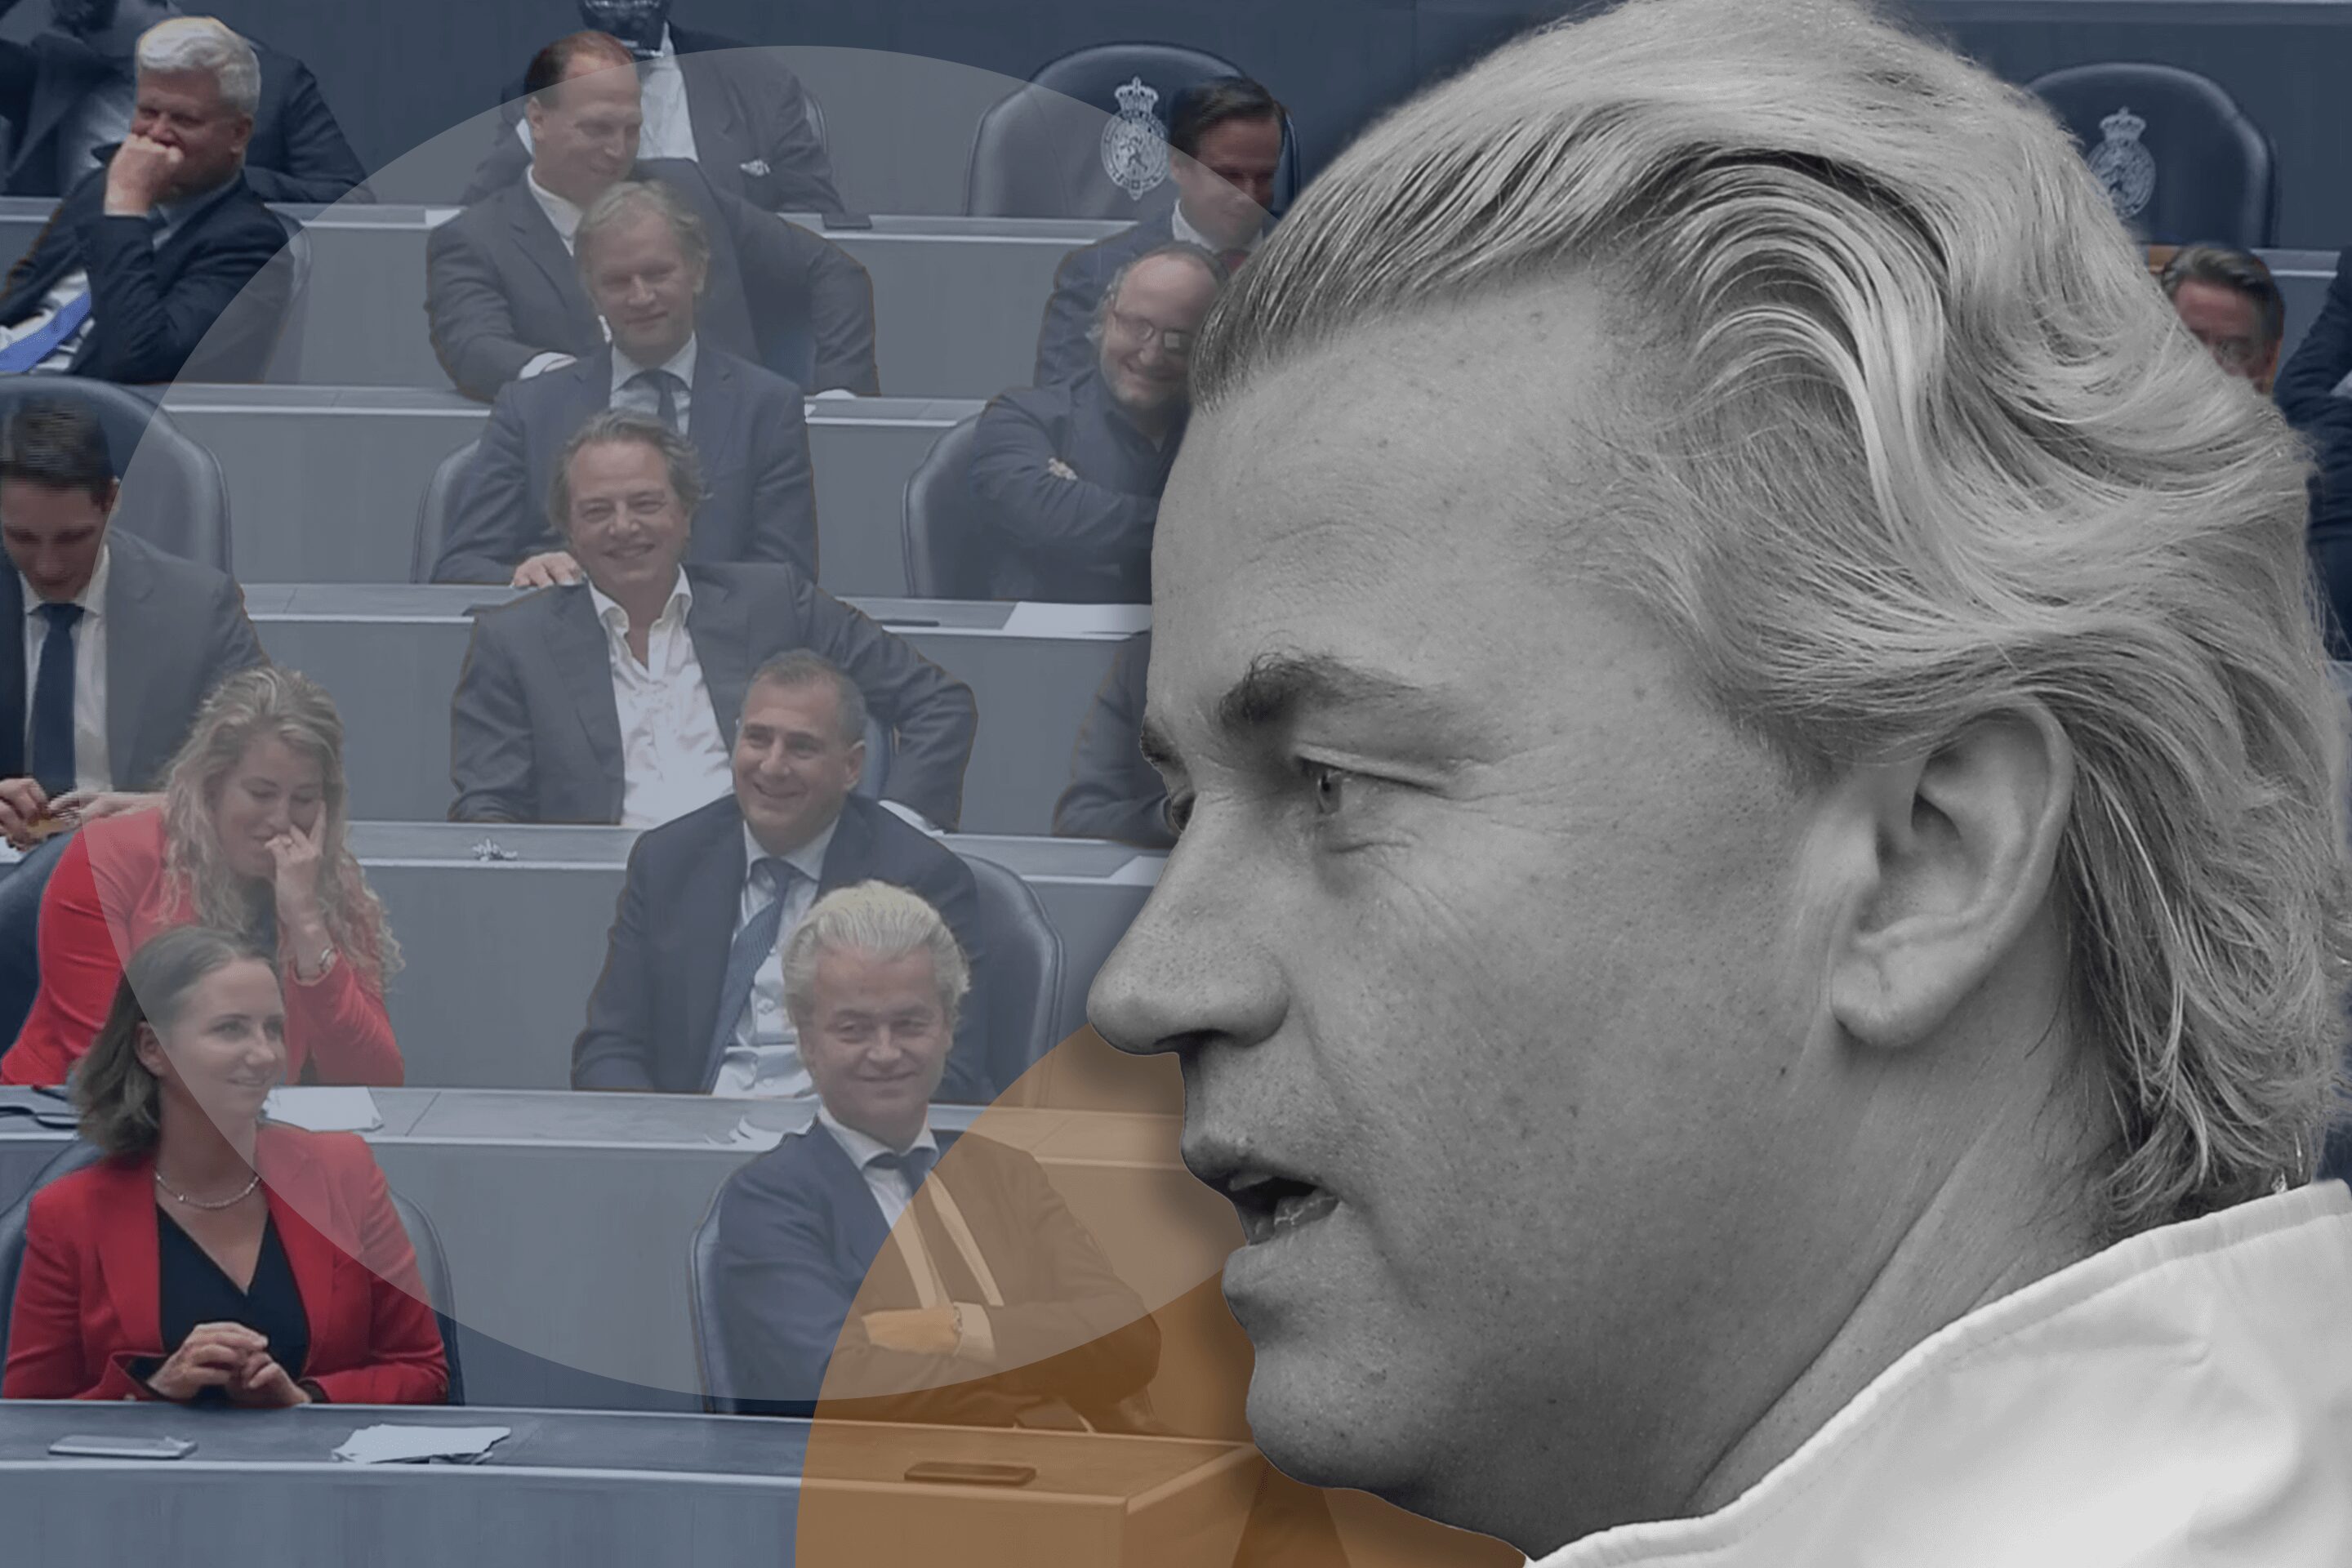 Geert Wilders’ win is not a victory “for Freedom”